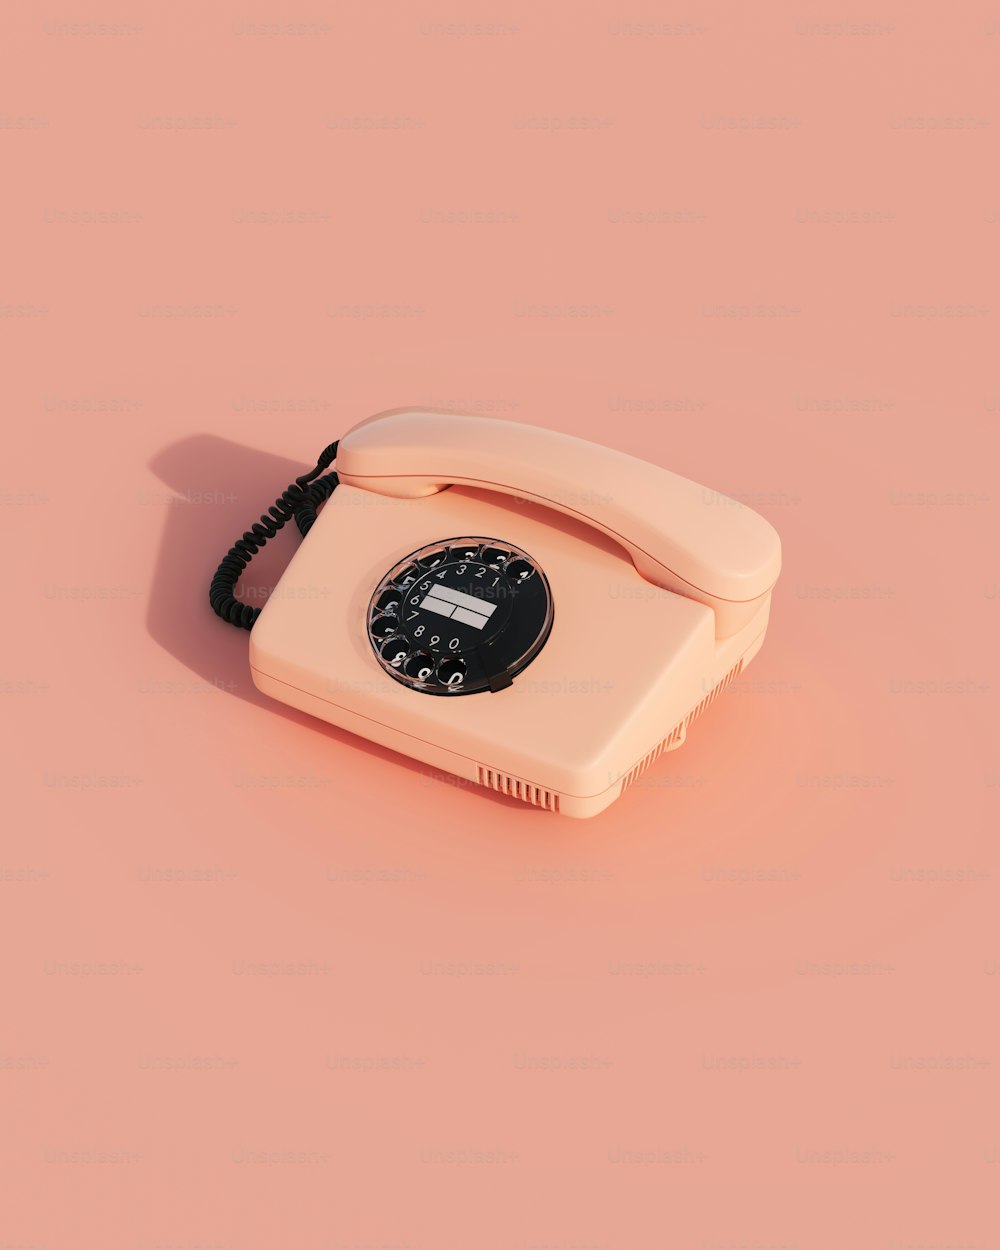 an old fashioned phone on a pink background